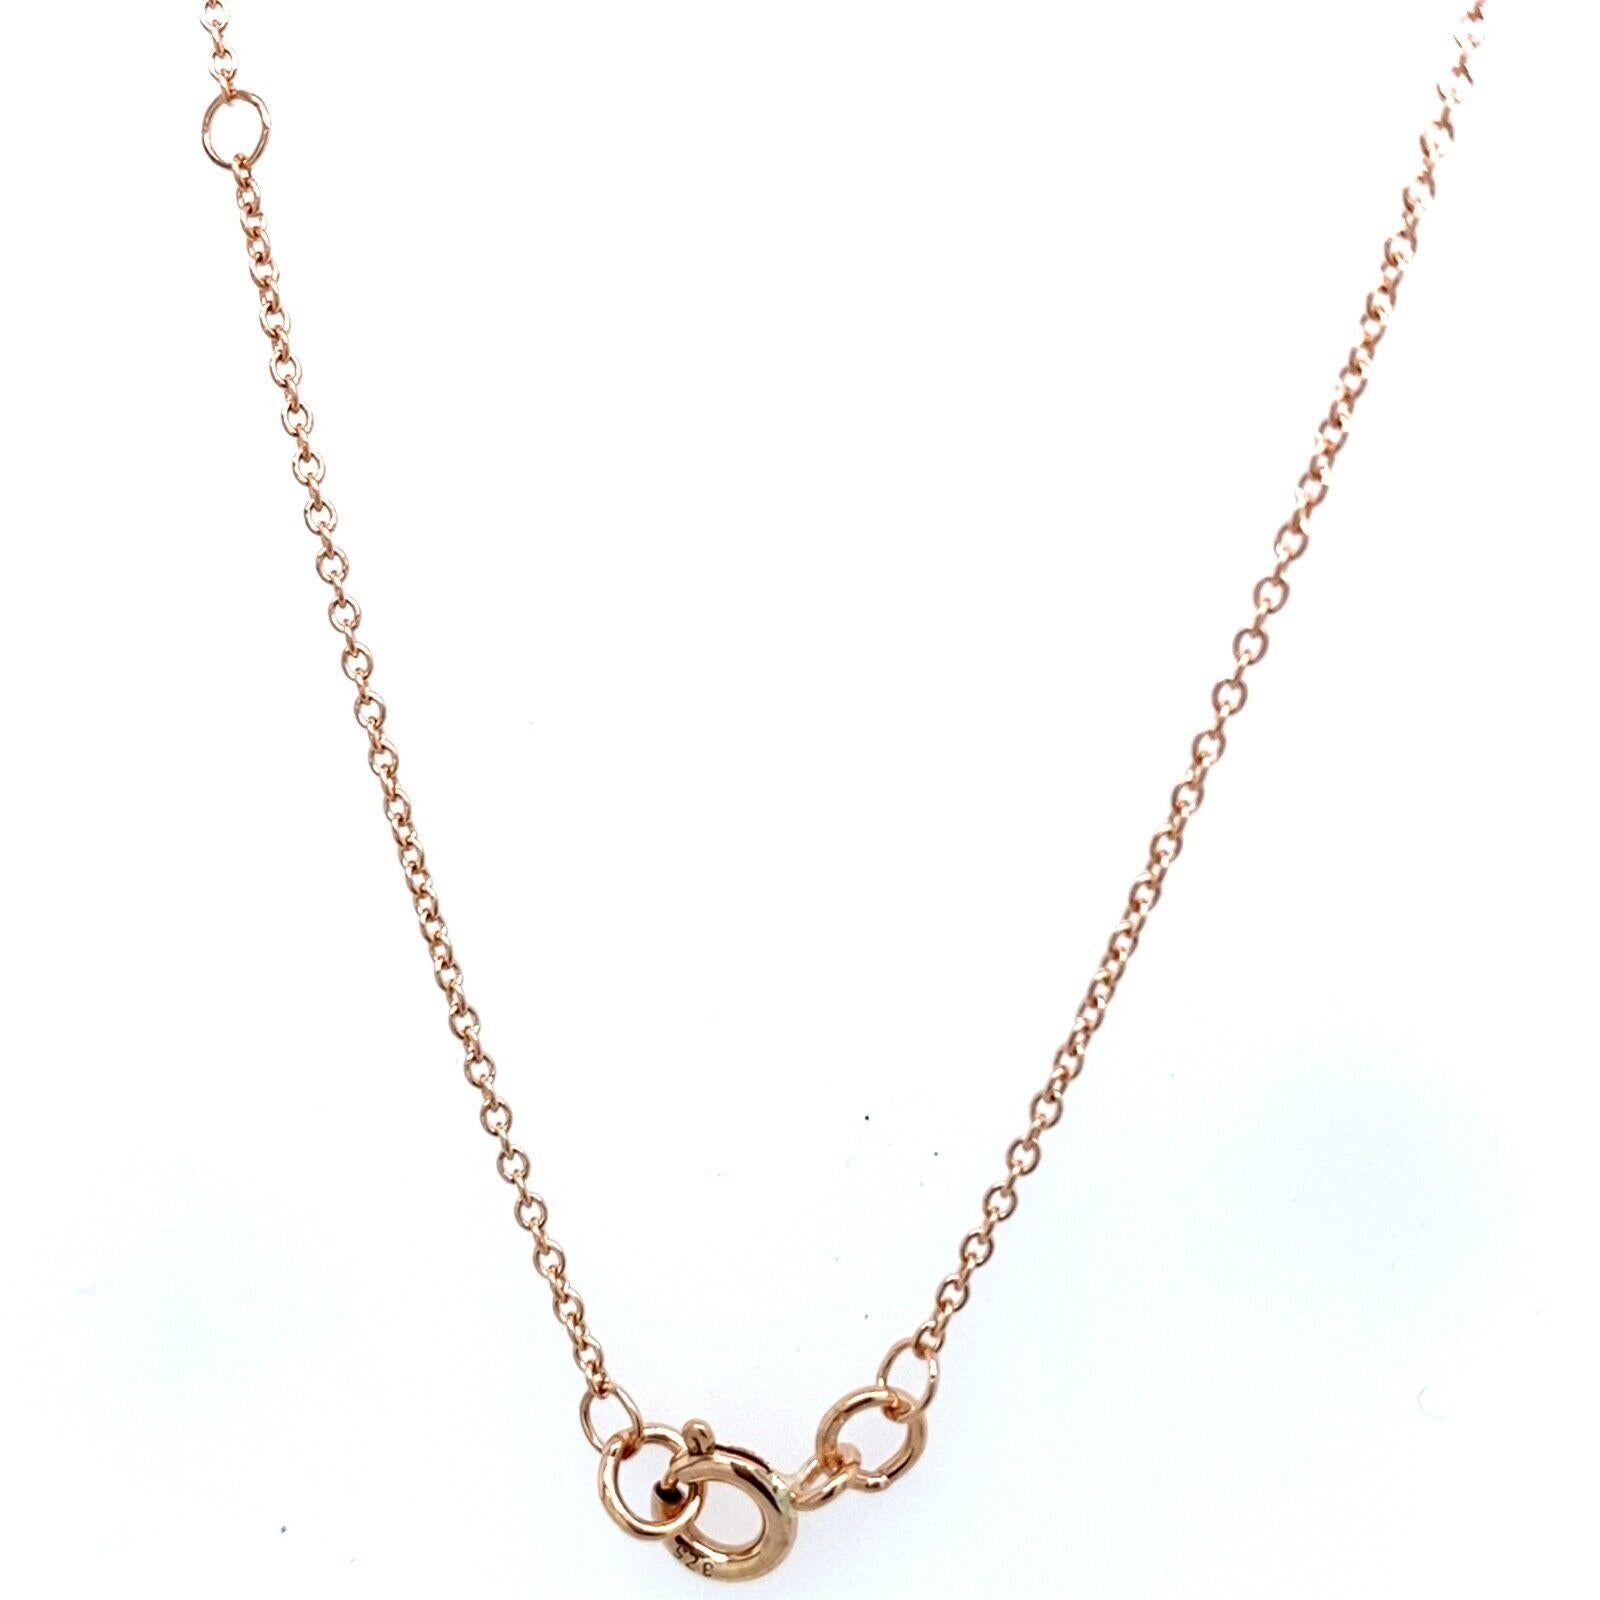 This elegant diamond necklace on a 18ct yellow gold chain features five mix shaped pink intense diamonds. Each stone is set in a prong setting and the chain is made of 18ct yellow gold. The necklace is a great gift for an anniversary or